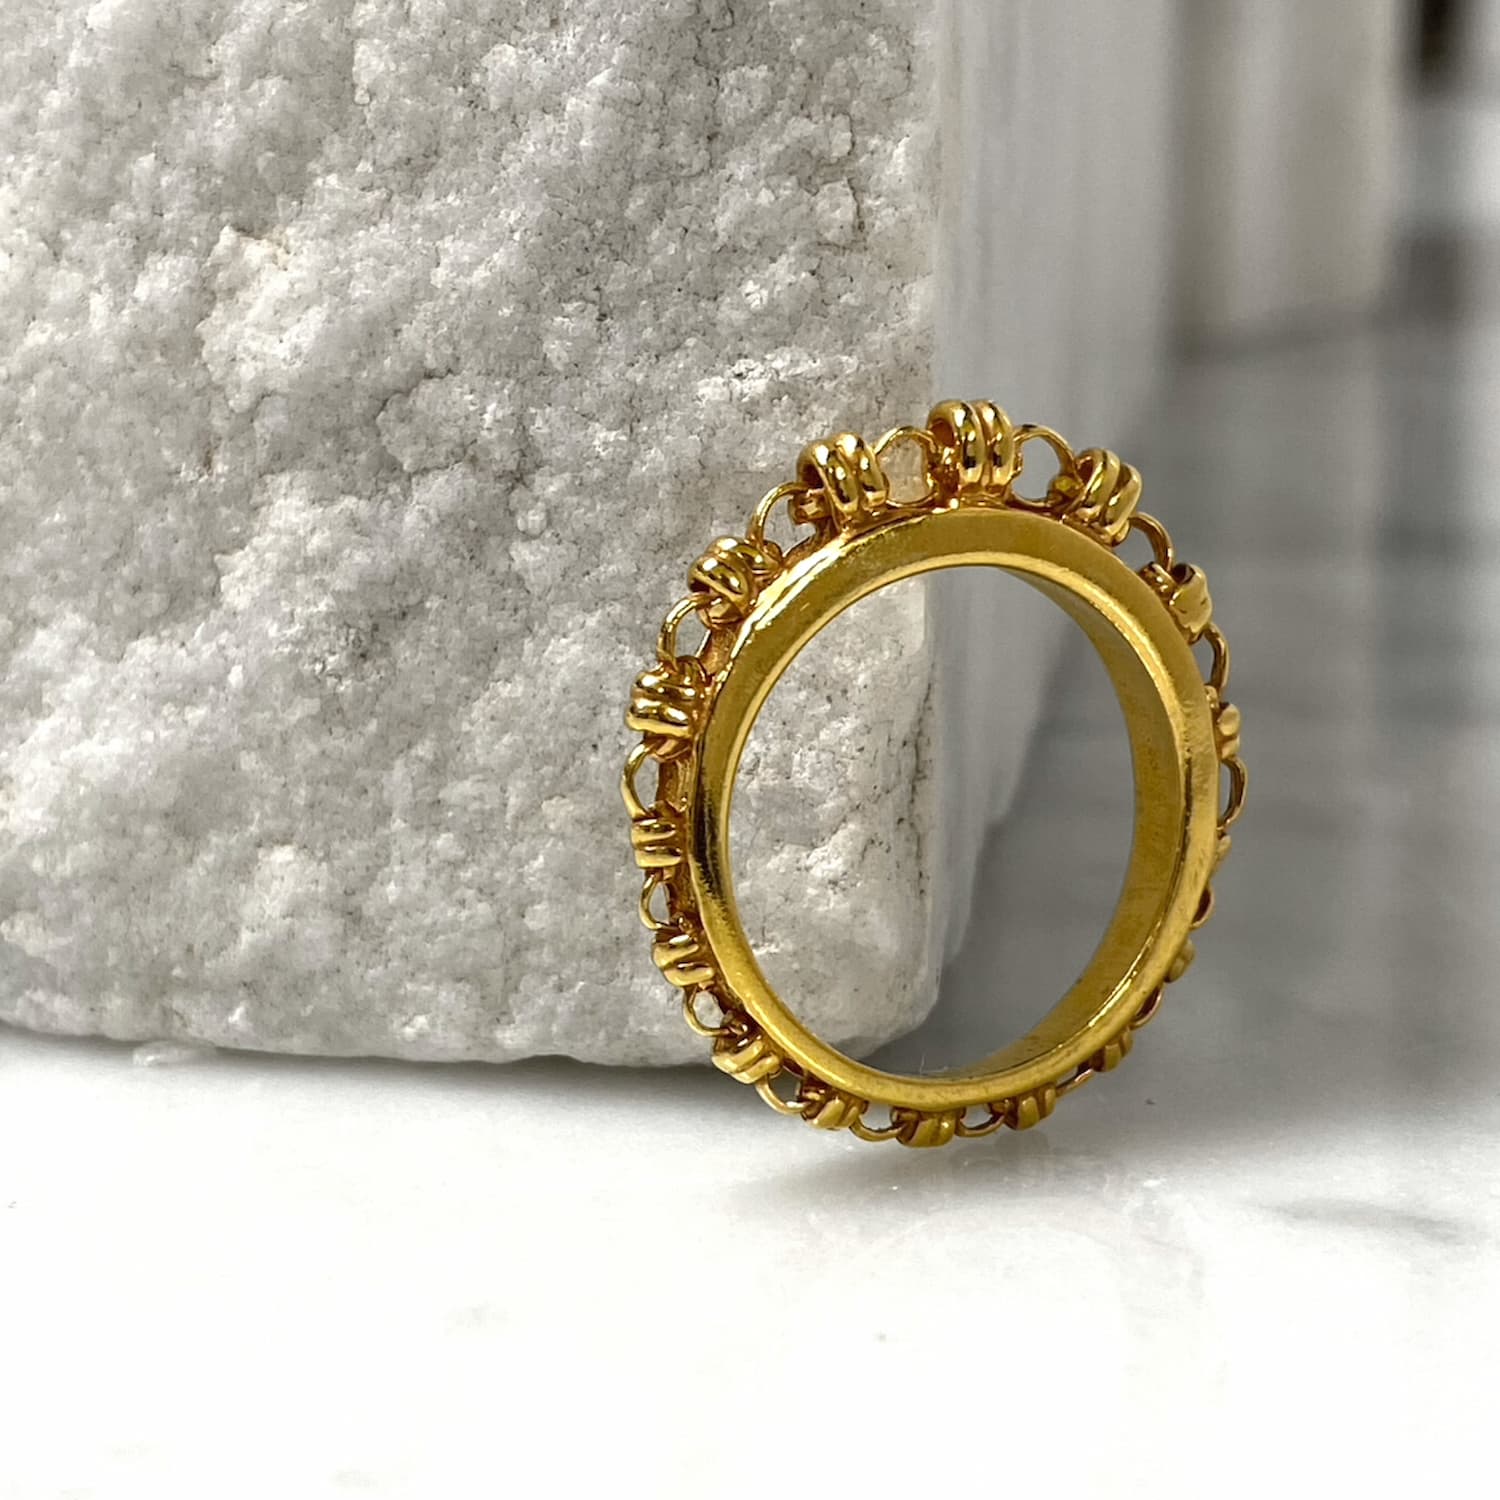 An angled view of a gold ring with a gold chain design that has varying sizes of links to resemble a climb to the top - thus its Italian name ‘Scalare’: to climb. Designed and hand-crafted by DelBrenna Italian Jewelry designers and artisans in Tuscany. 